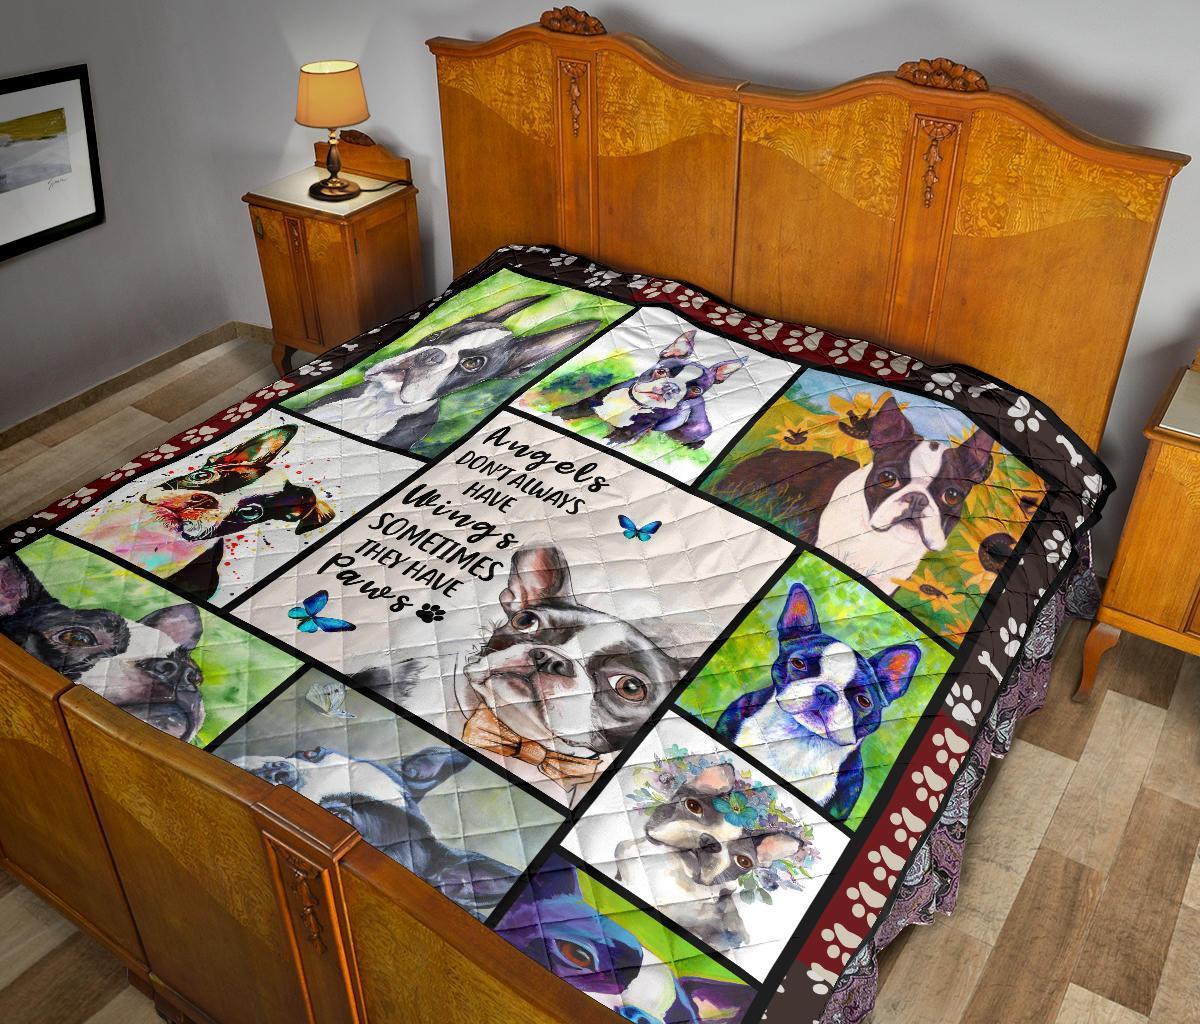 Boston Terrier Dog Quilt Blanket Angels Sometimes Have Paws-Gear Wanta